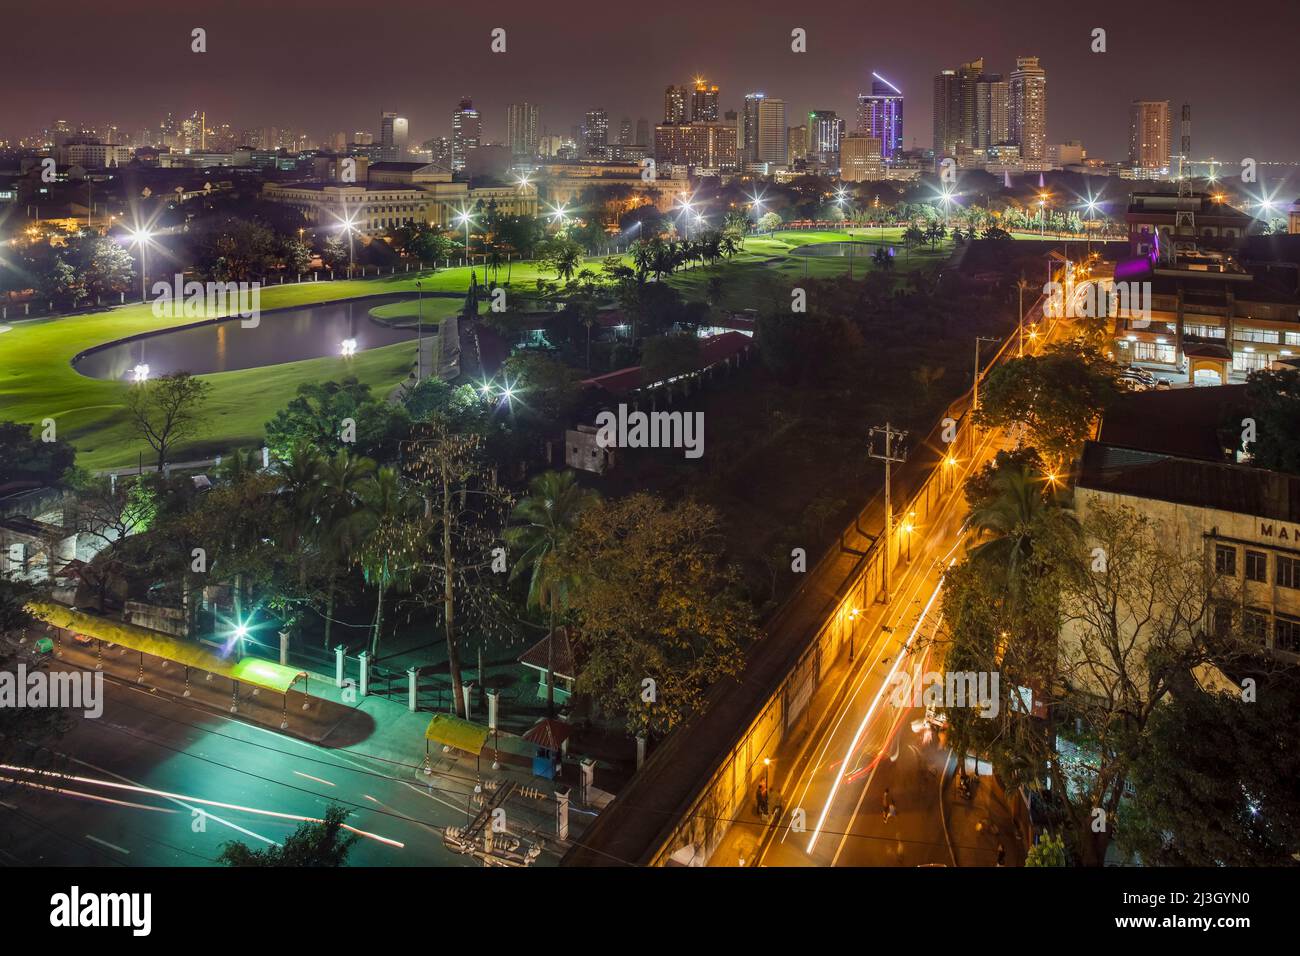 Philippines, Metro Manila, Intramuros, view from the Bayleaf Hotel, elevated view of Club Intramuros Golf Course, illuminated at night Stock Photo